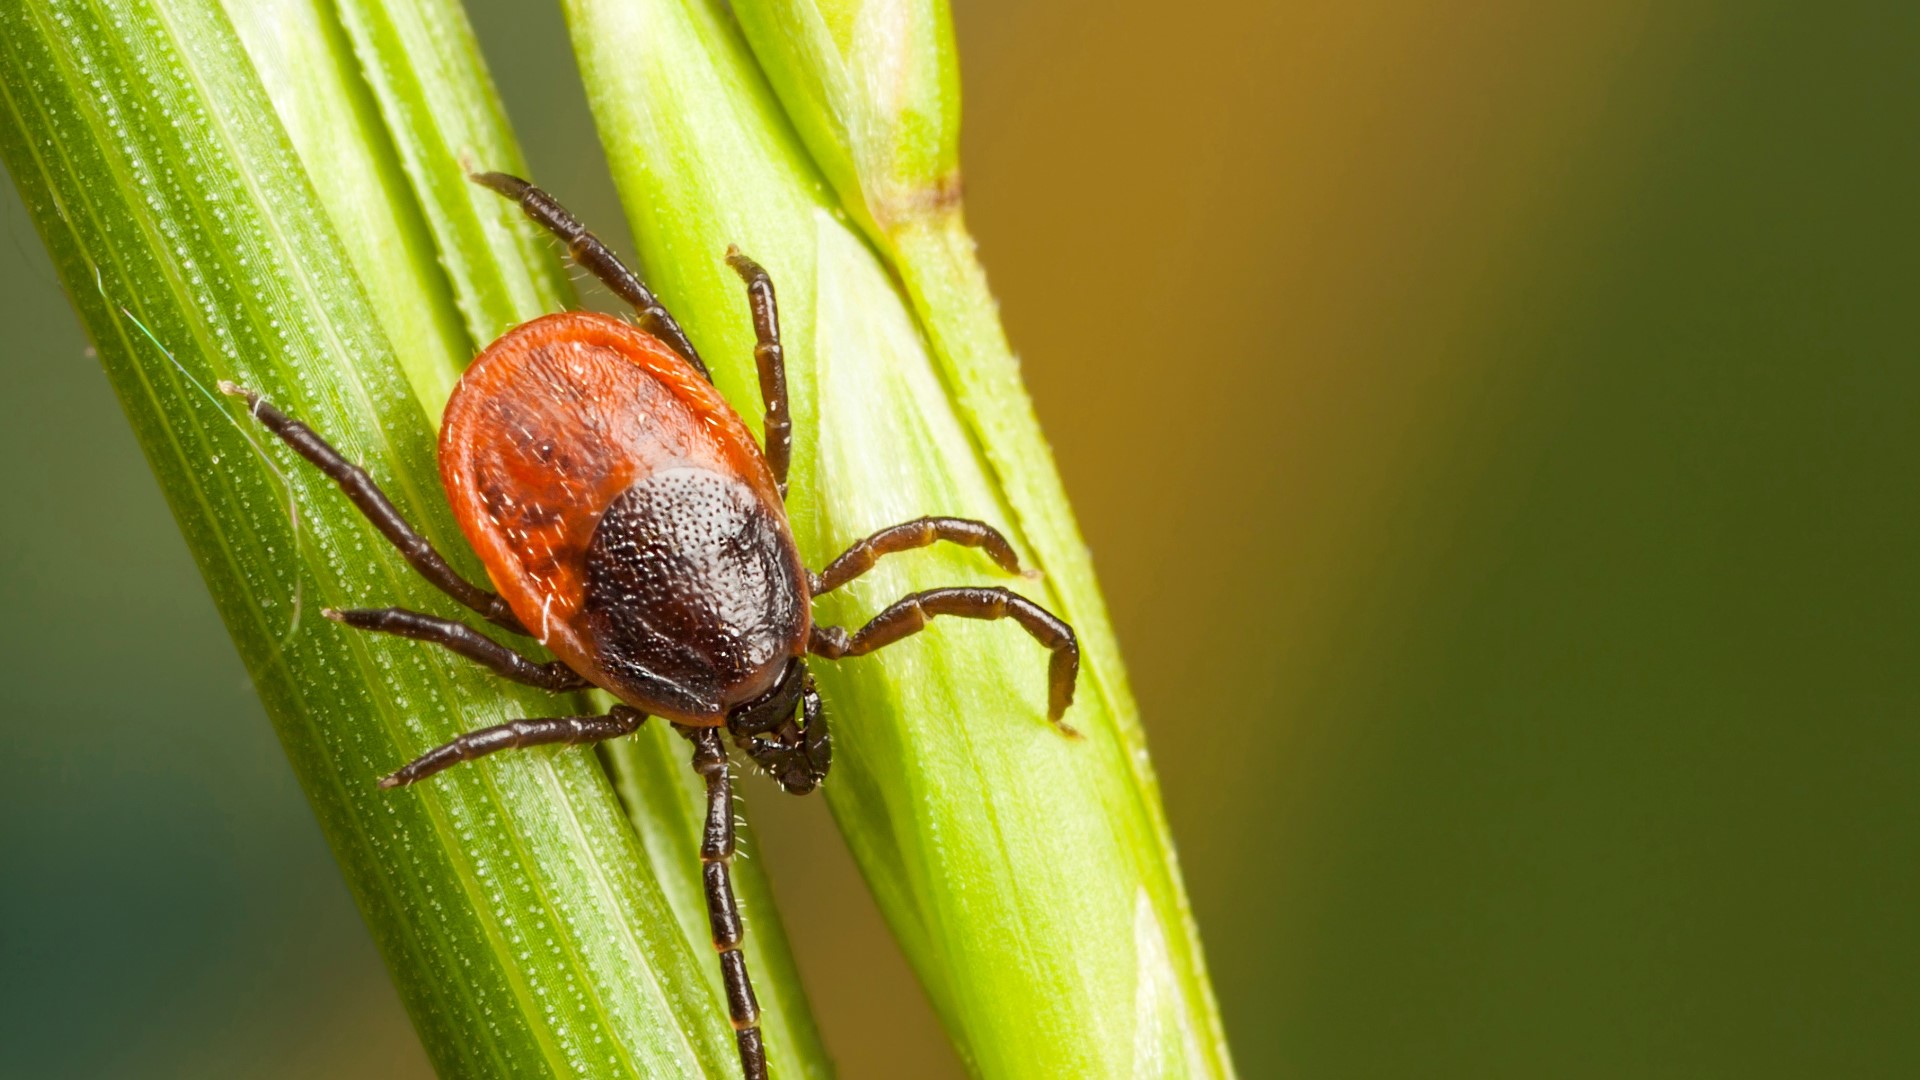 Ticks are loving the extended spring season, and they're showing it by reproducing.